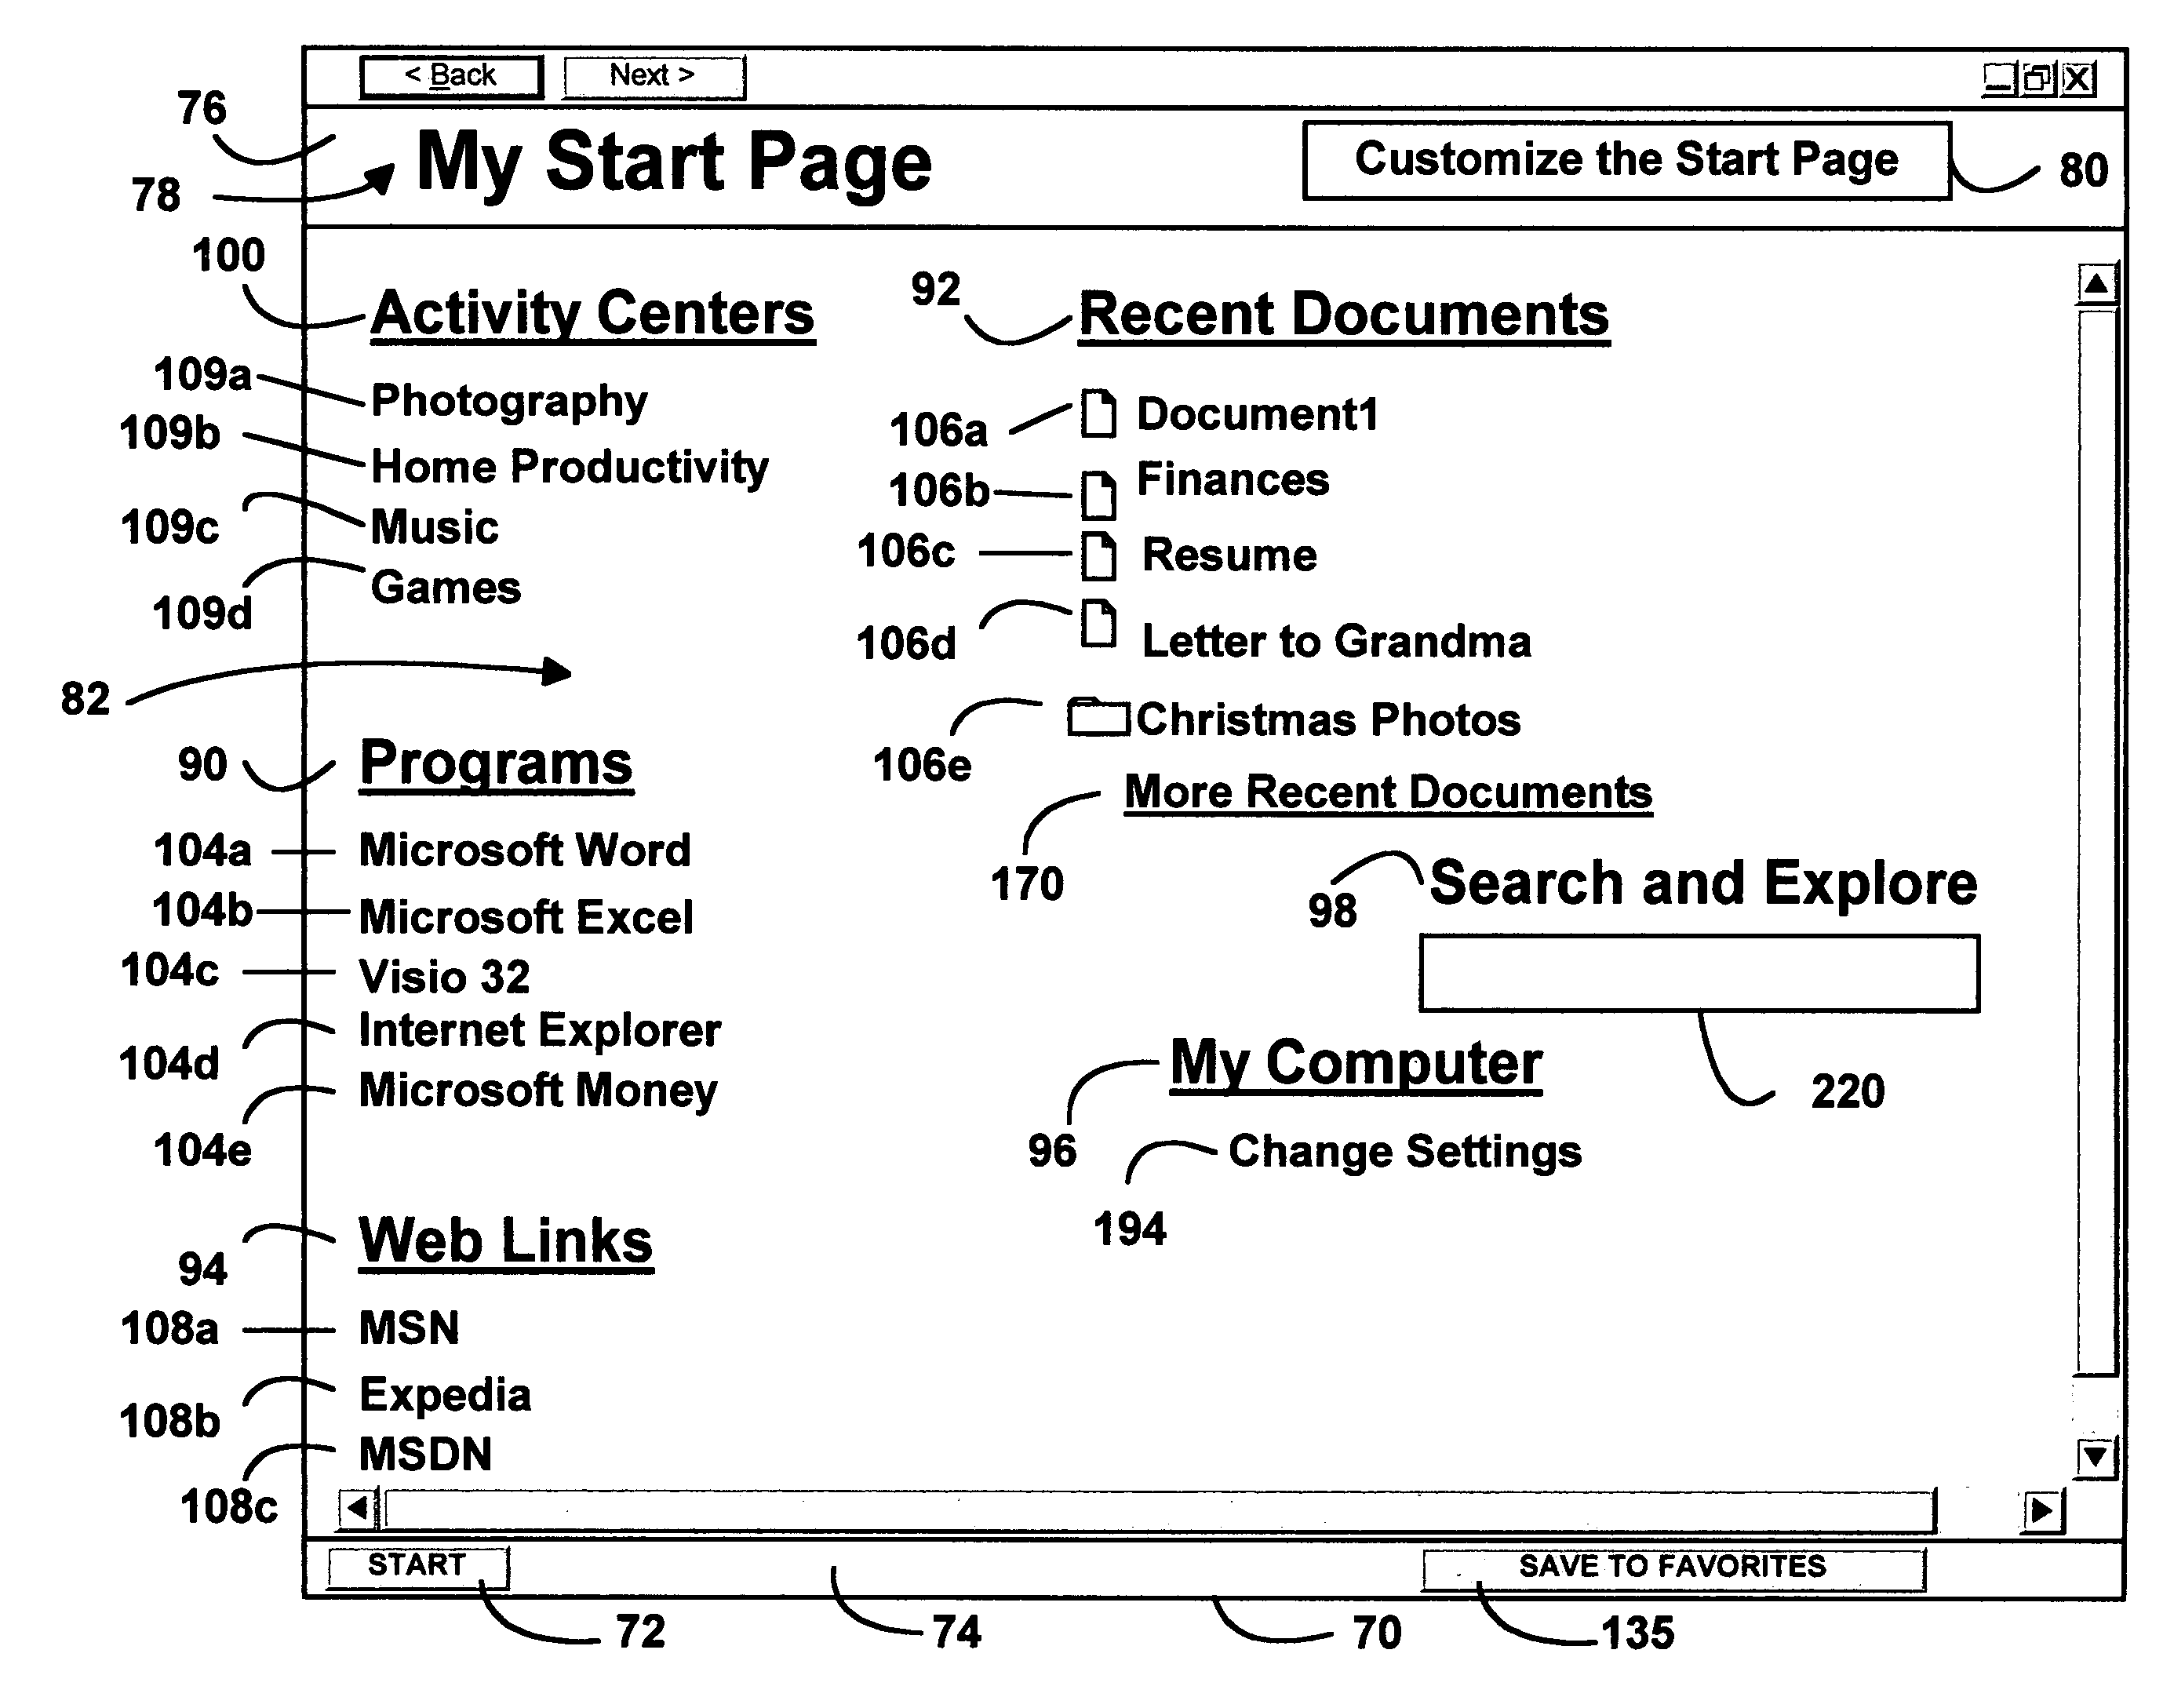 Multiple-page shell user interface